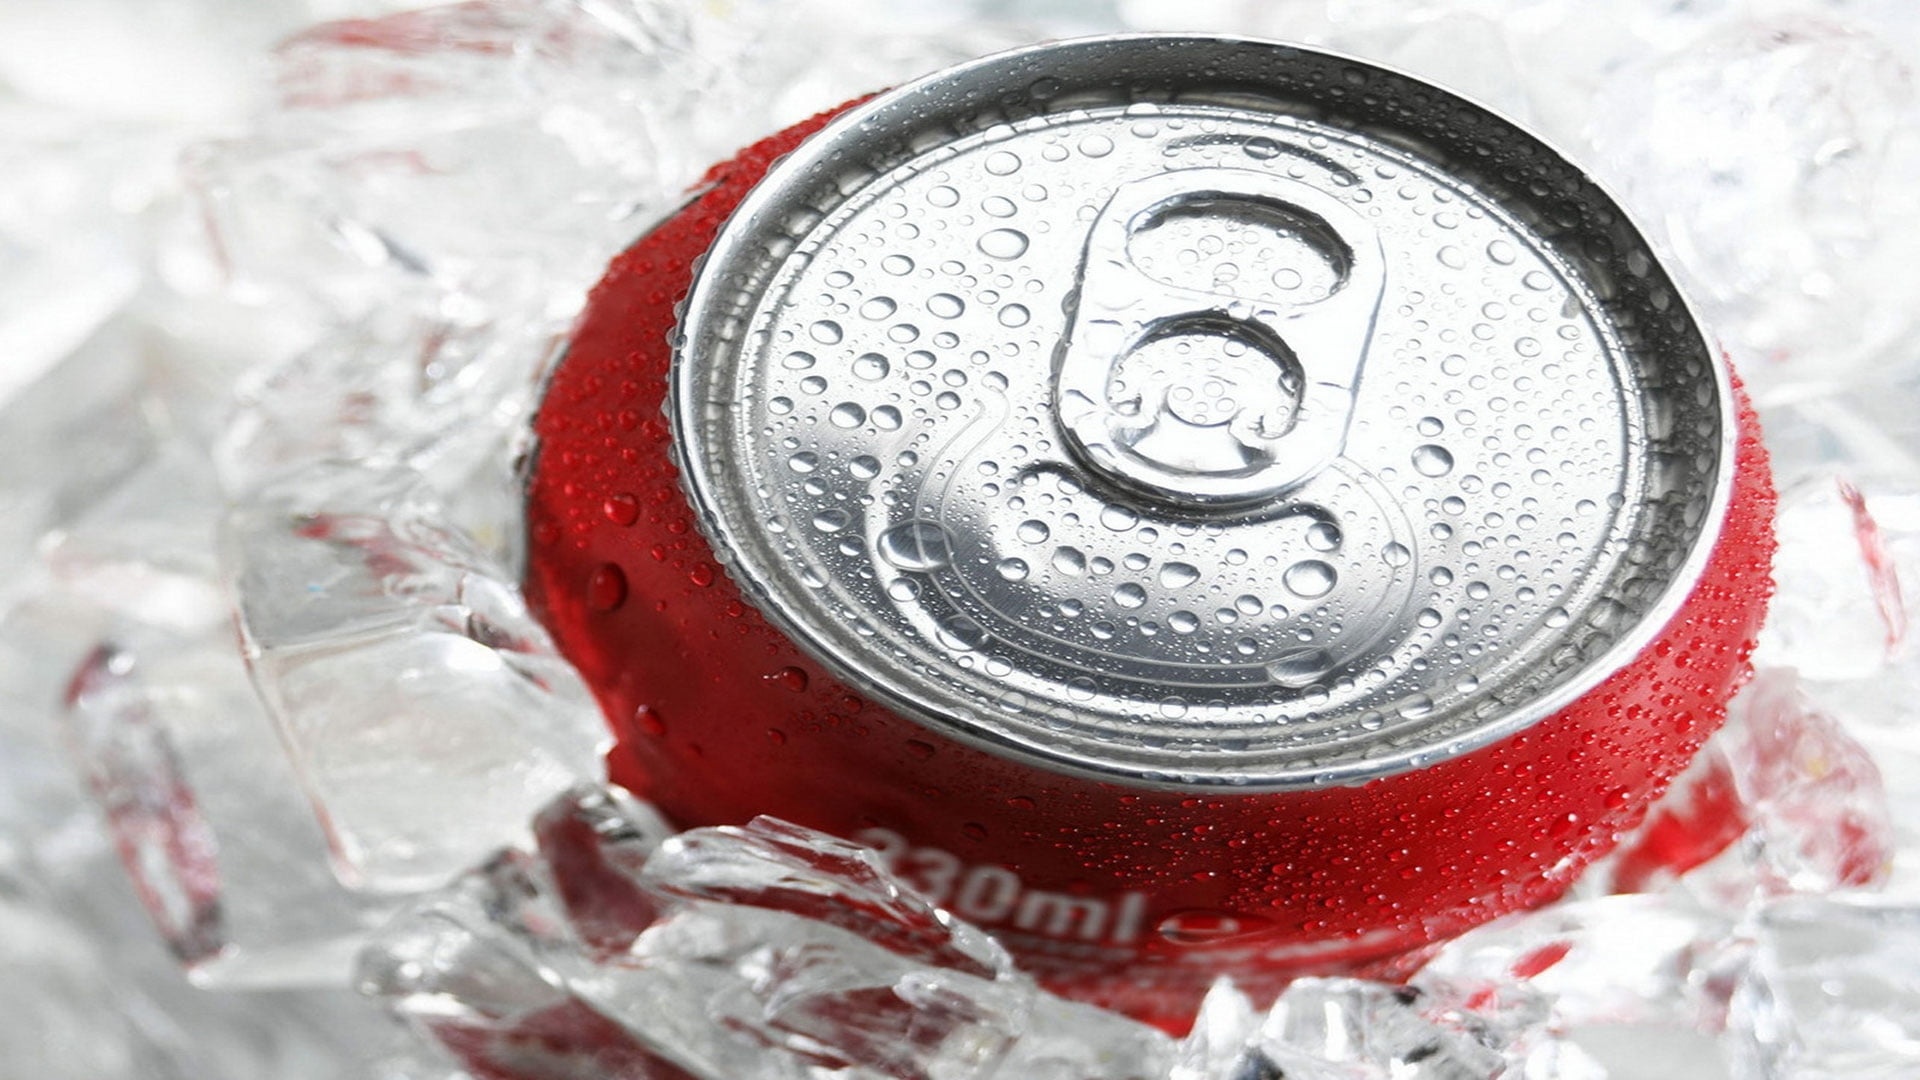 330mL Coca-cola can covered with ice cubes